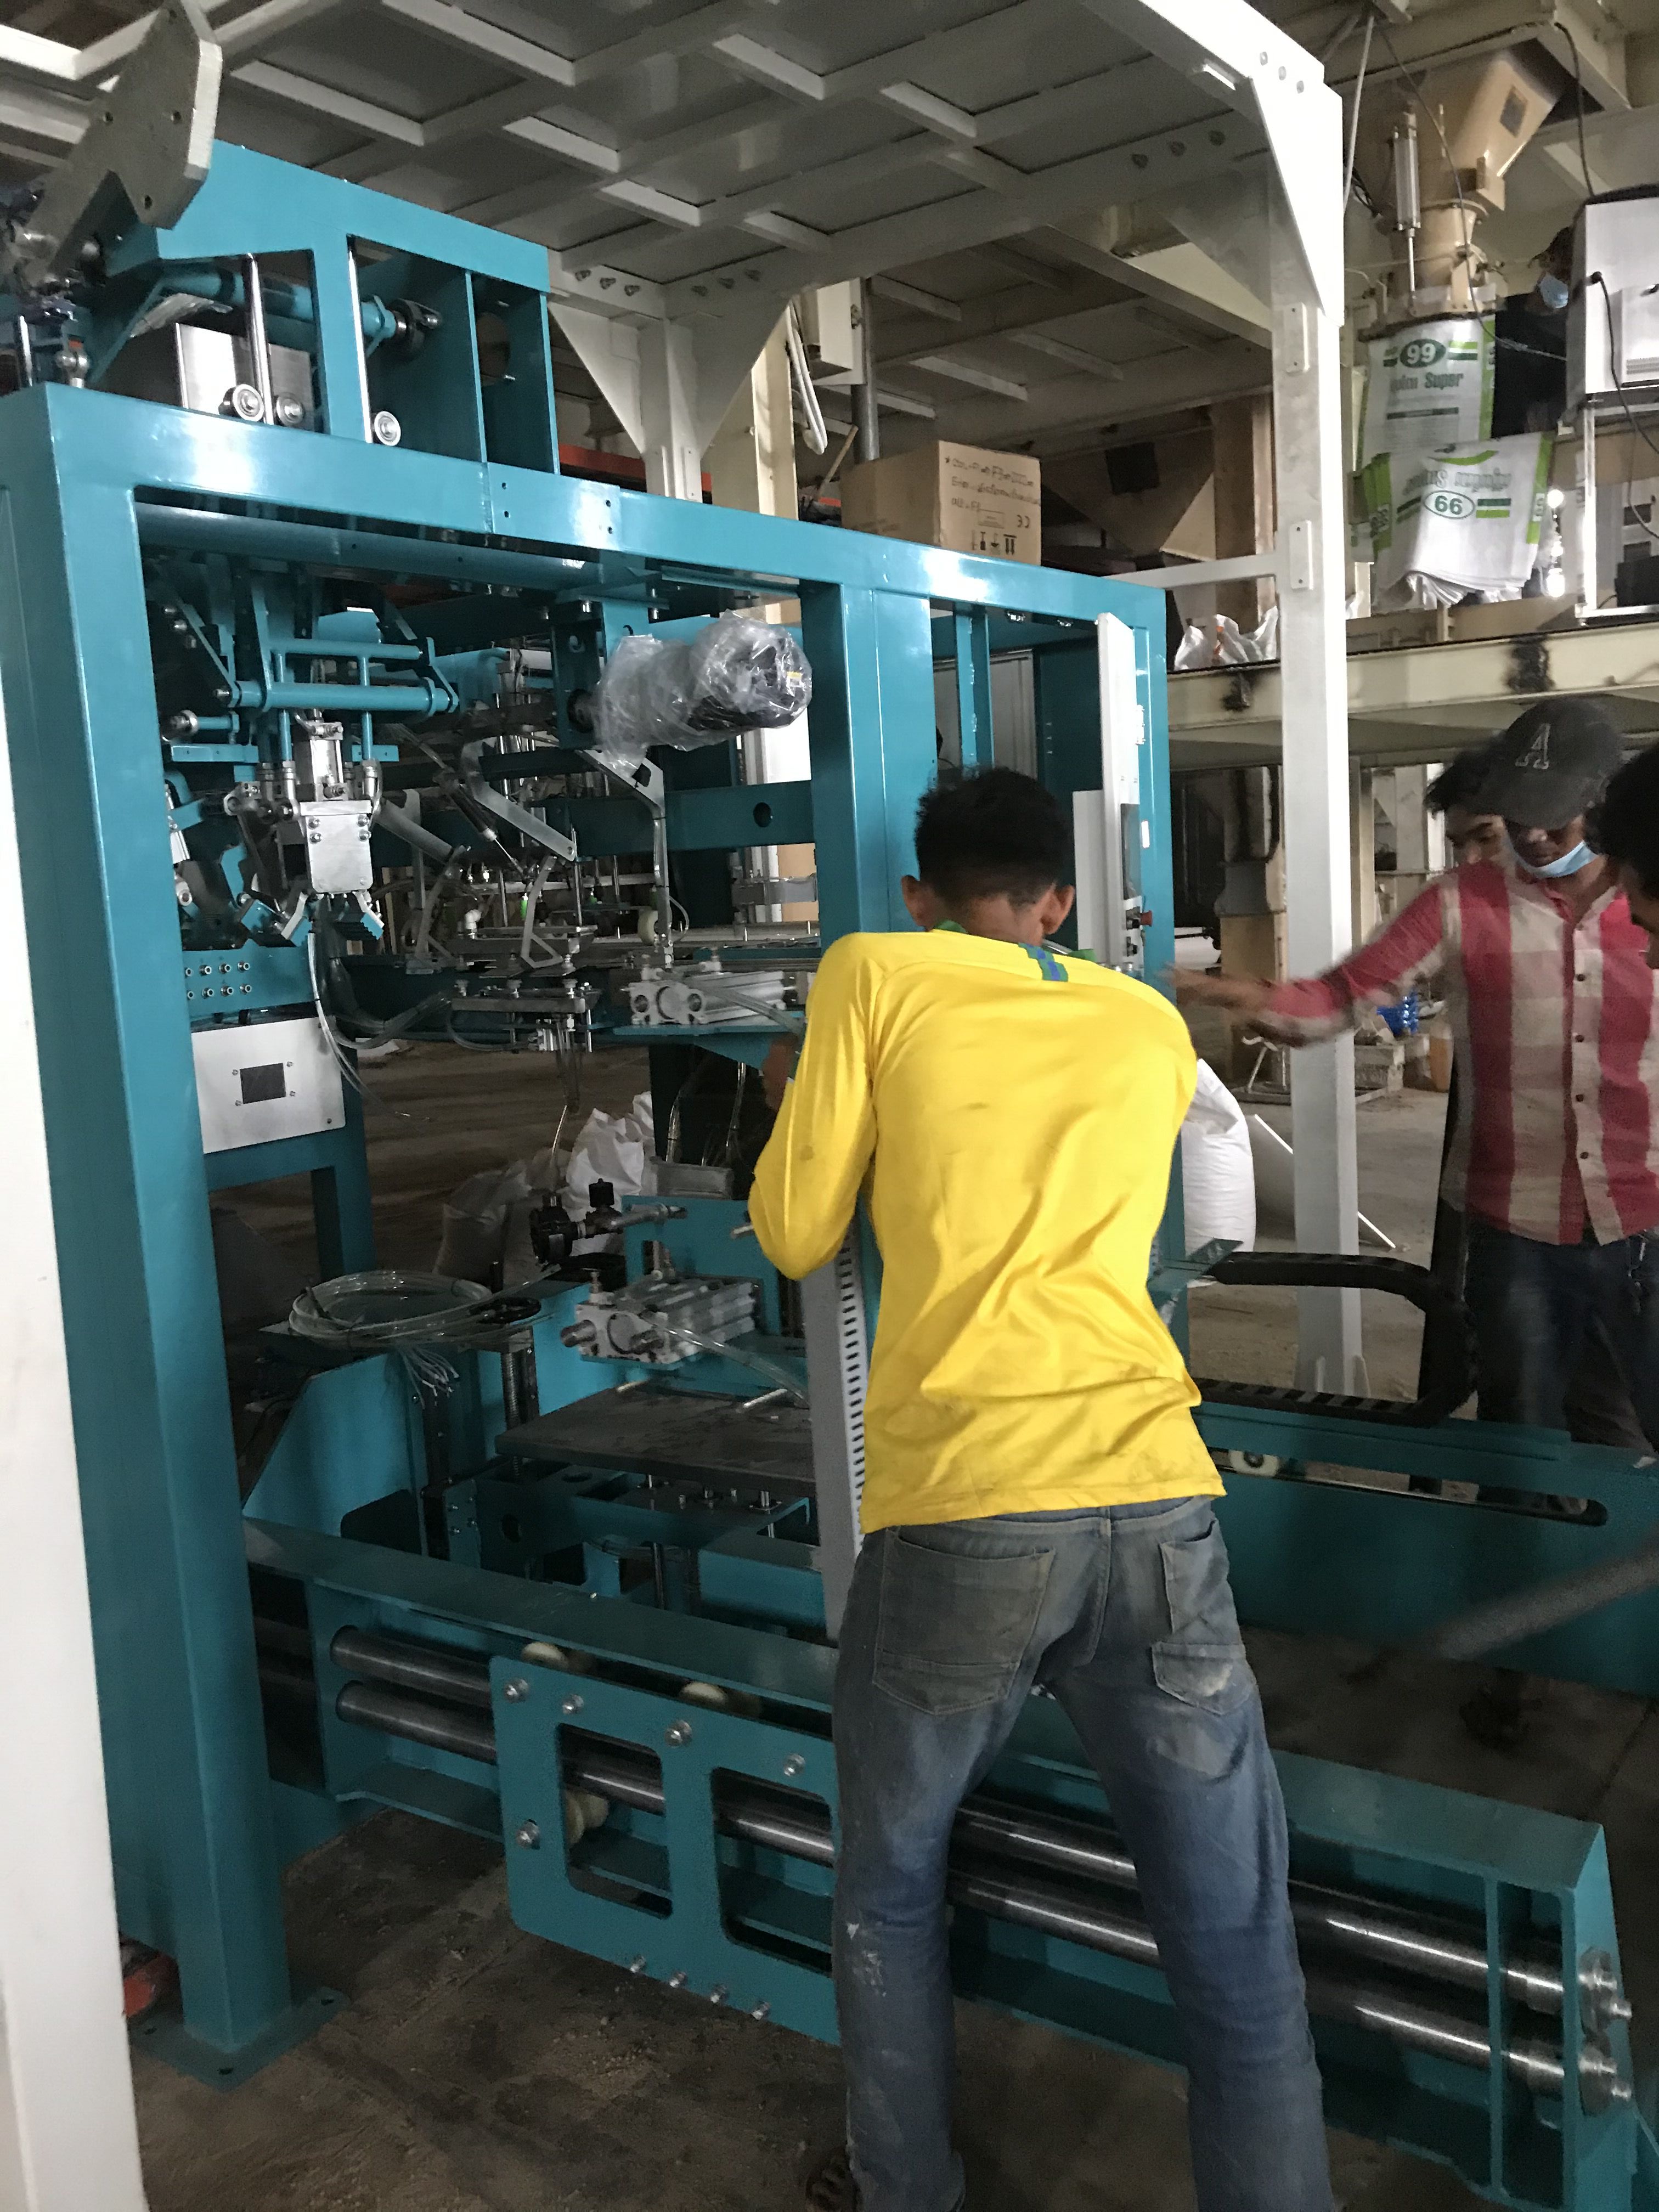 Supertop Calcium Ammonium Nitrate bagging machine Automated Bagging Line Fully Automatic Packing Palletizing Line, Fully Automatic Packing Line, Fully Automatic Bagging Line, Fully Automatic filling a